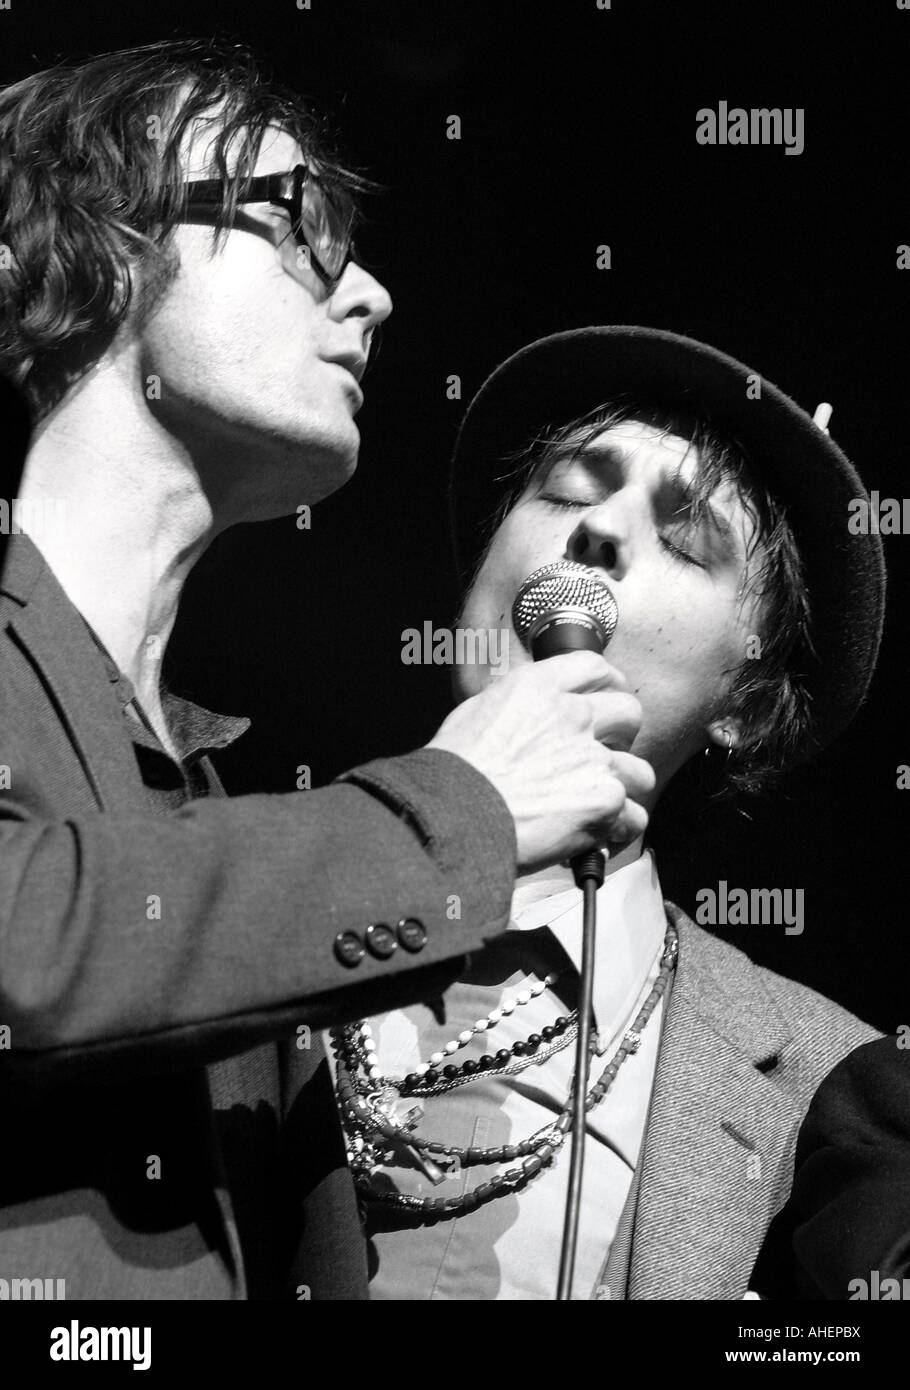 JARVIS COCKER and PETE DOHERTY at the 2007 Meltdown Festival Stock Photo